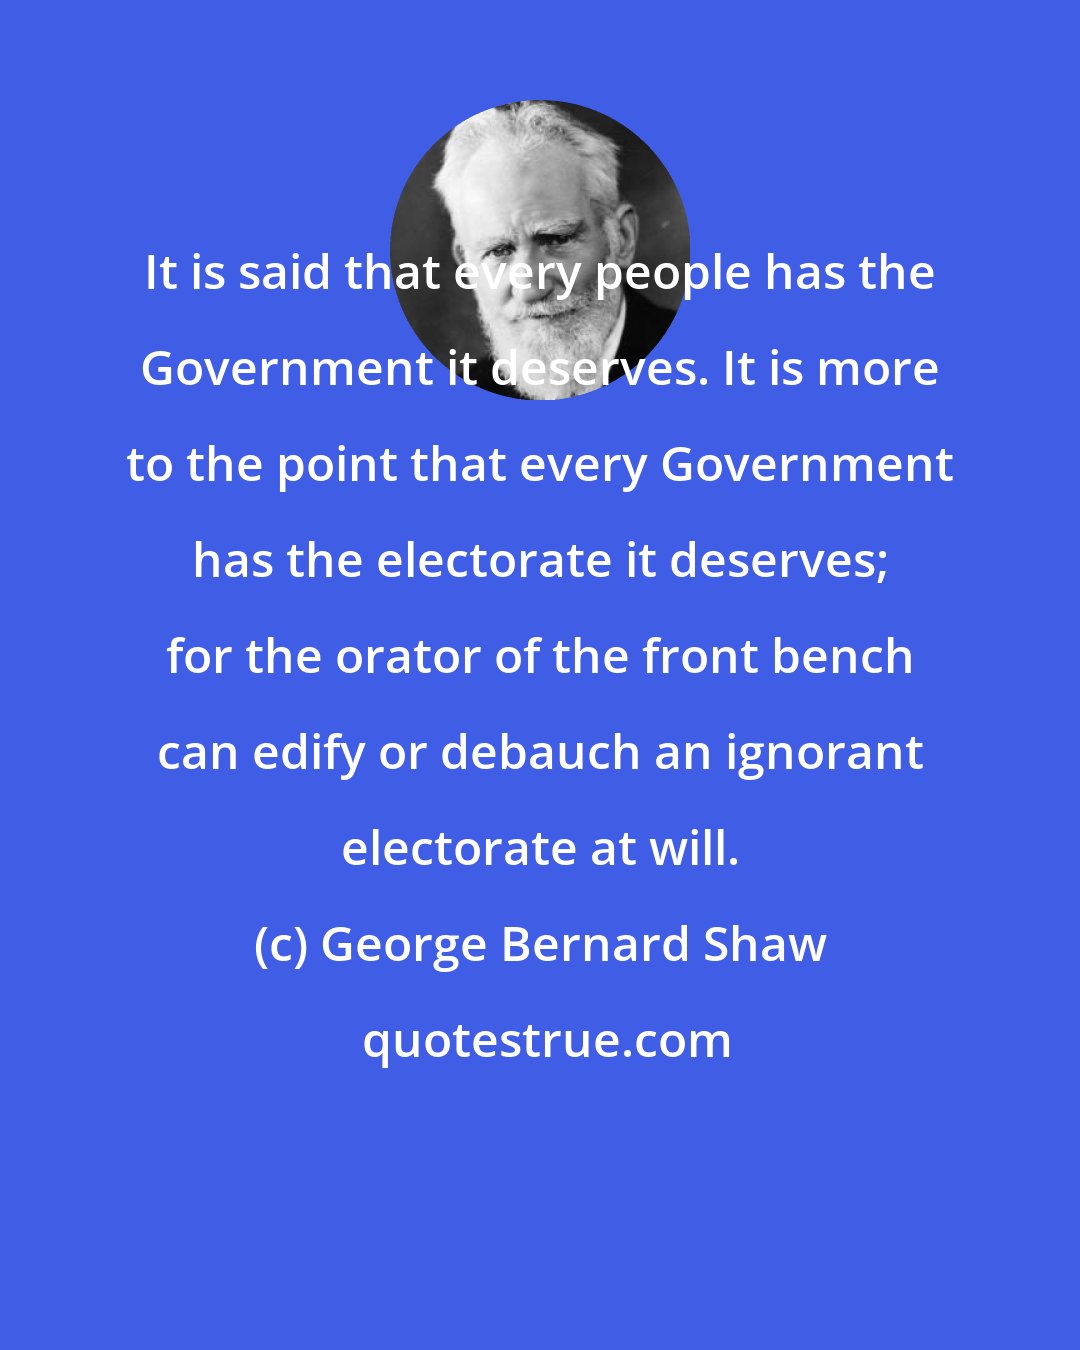 George Bernard Shaw: It is said that every people has the Government it deserves. It is more to the point that every Government has the electorate it deserves; for the orator of the front bench can edify or debauch an ignorant electorate at will.